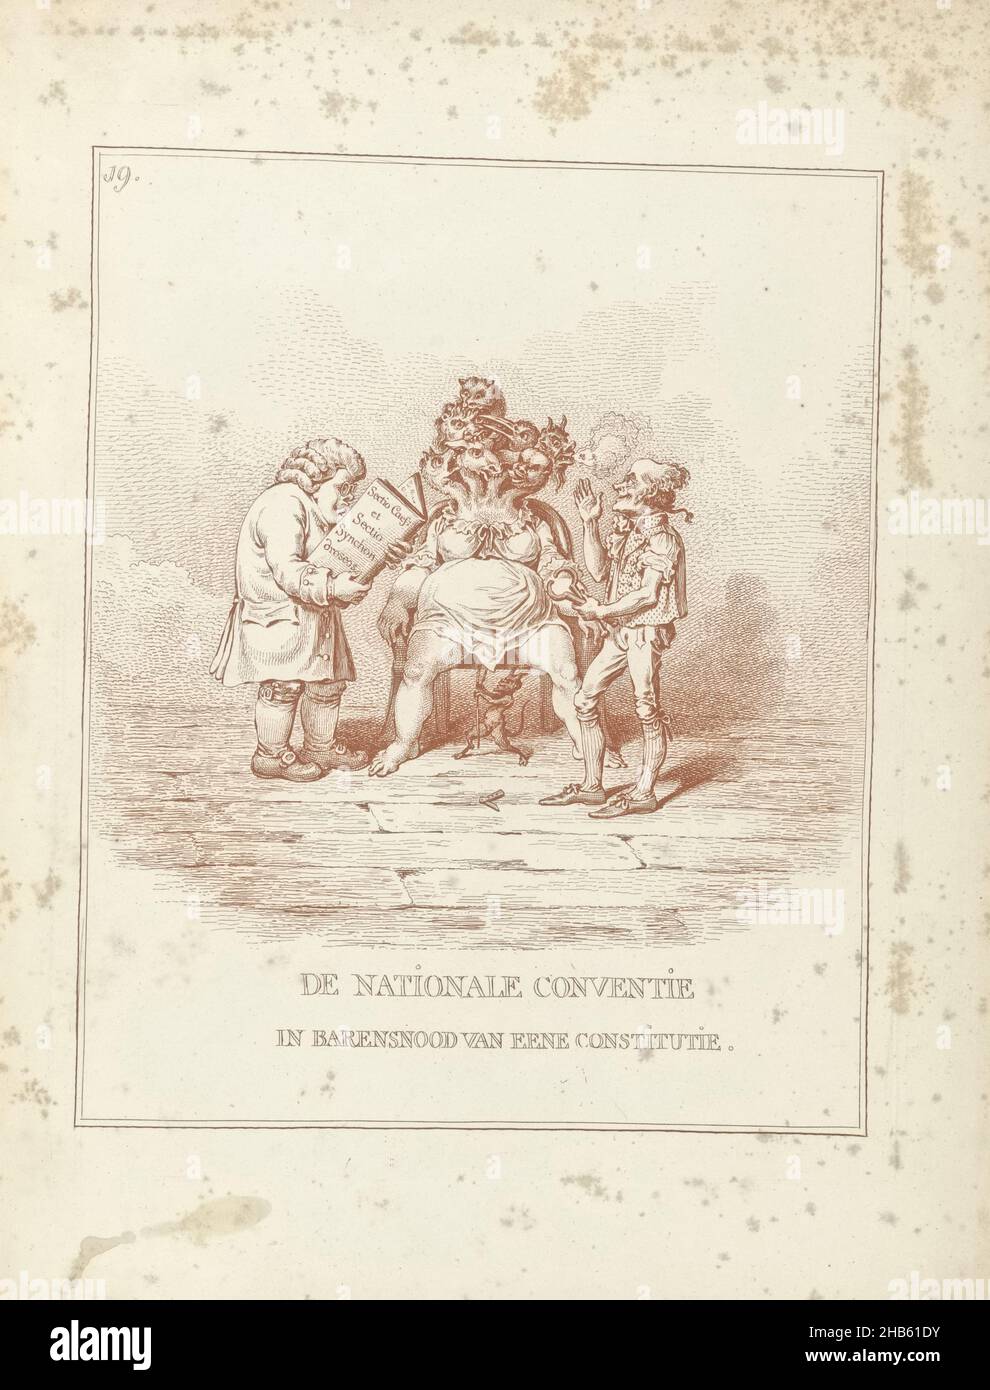 Barrenness of the National Convention, 1795, The National Convention in  Barrenness of a Constitution (title on object), Hollandia Regenerata  (series title), Cartoon showing the Batavian Republic as a seven-headed  monster trying to